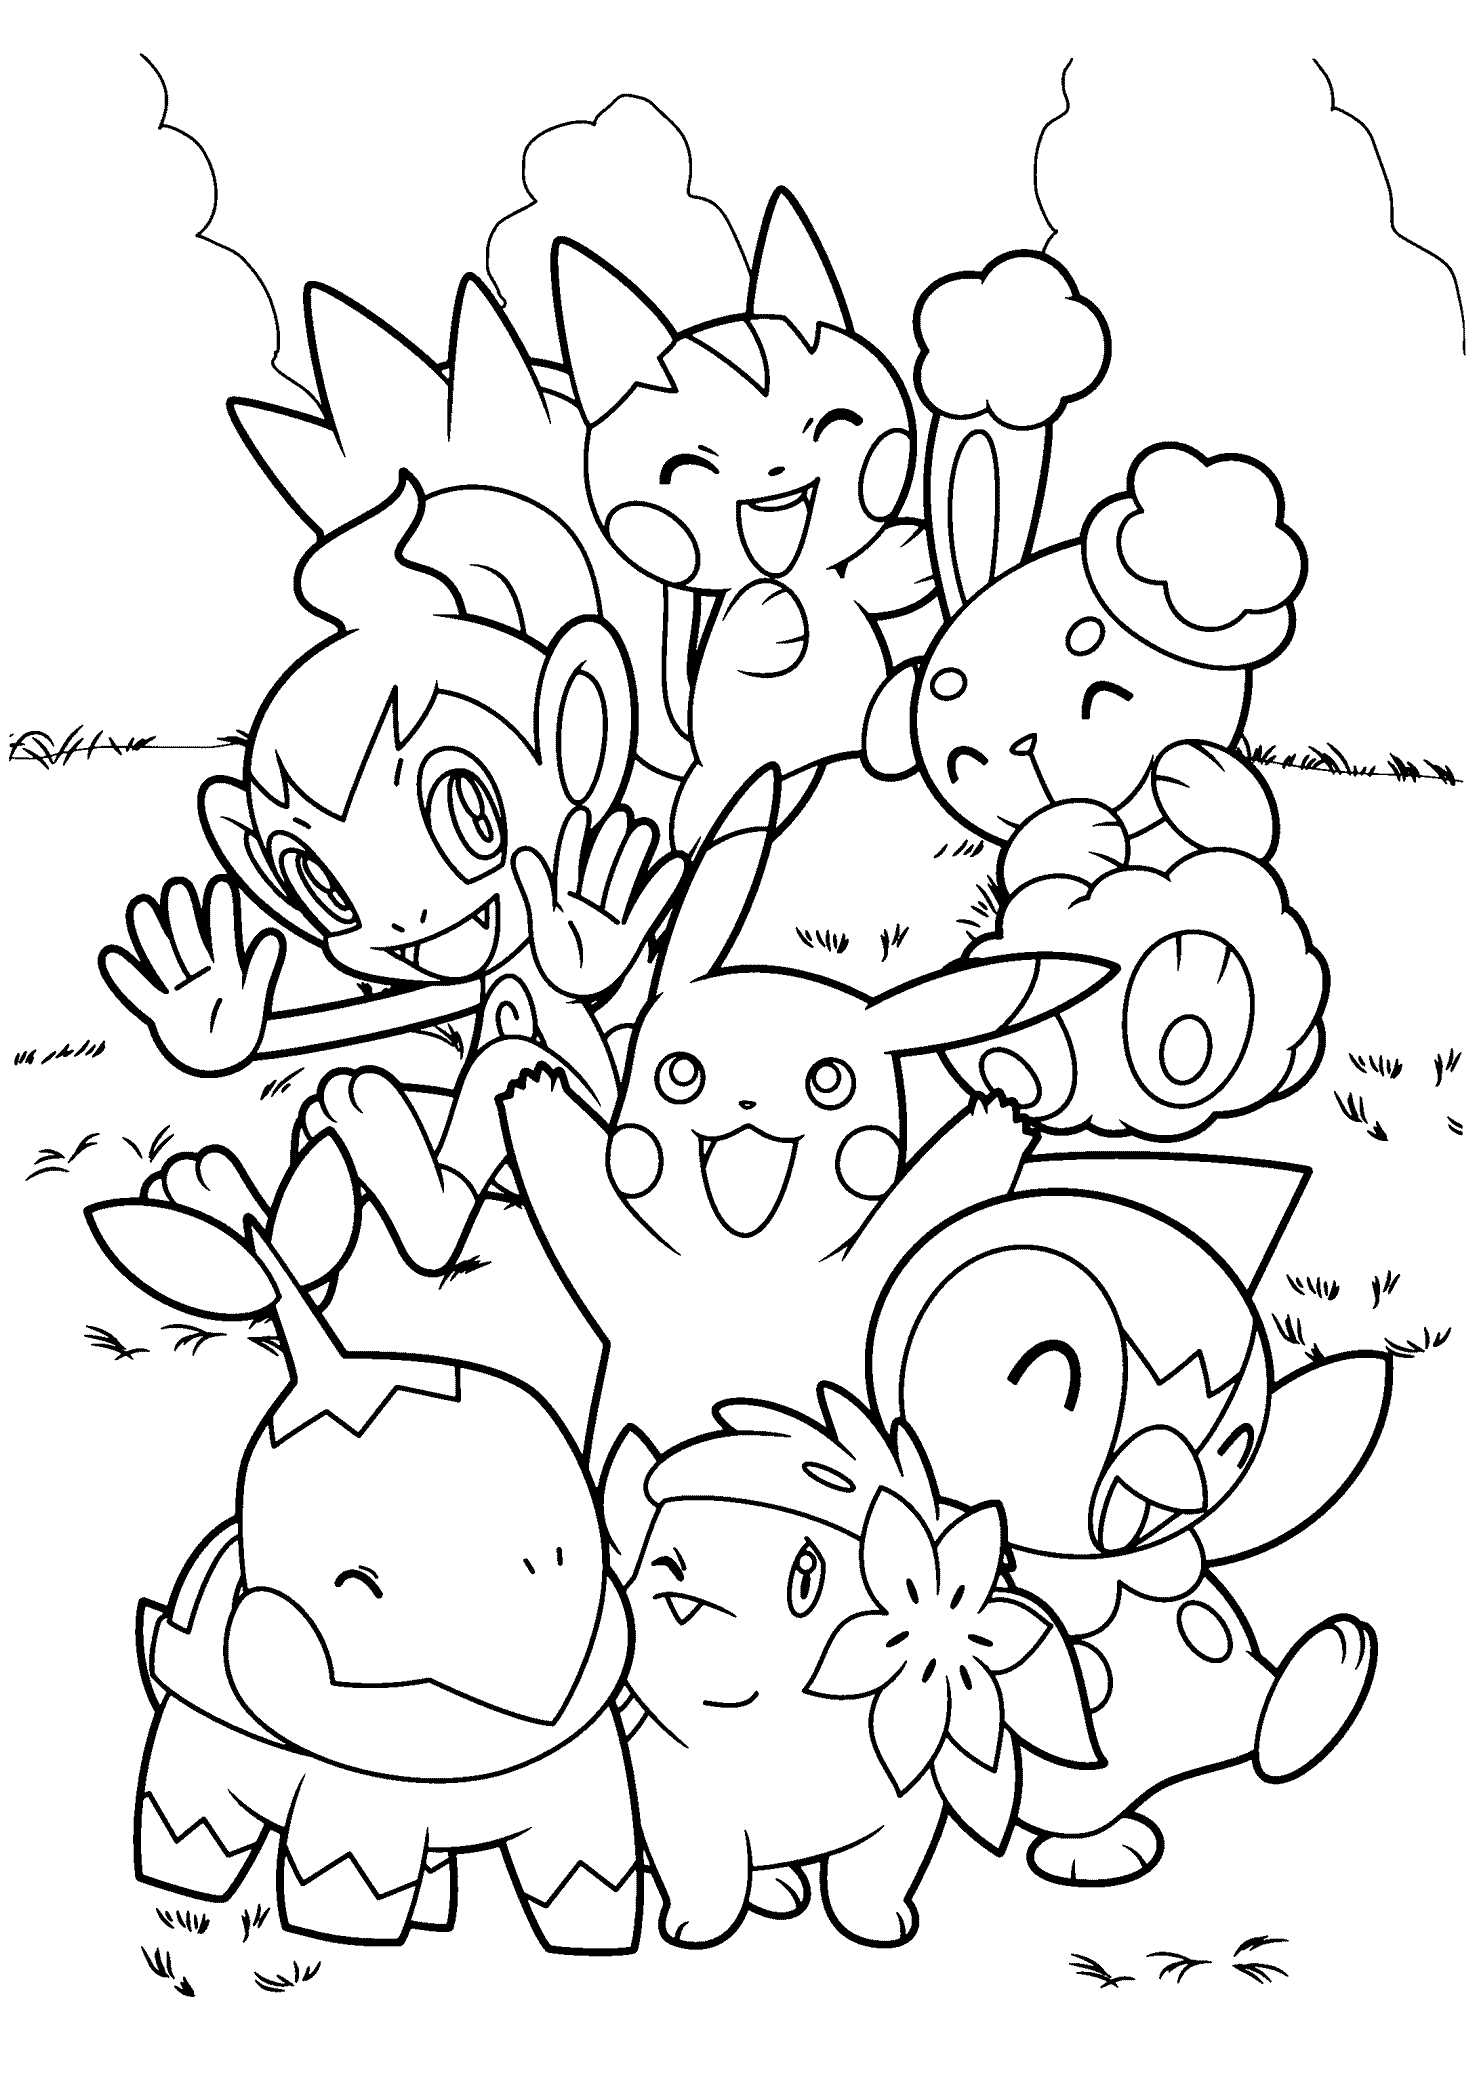 coloring pictures of pokemon pokemon coloring pages join your favorite pokemon on an coloring pictures of pokemon 1 1